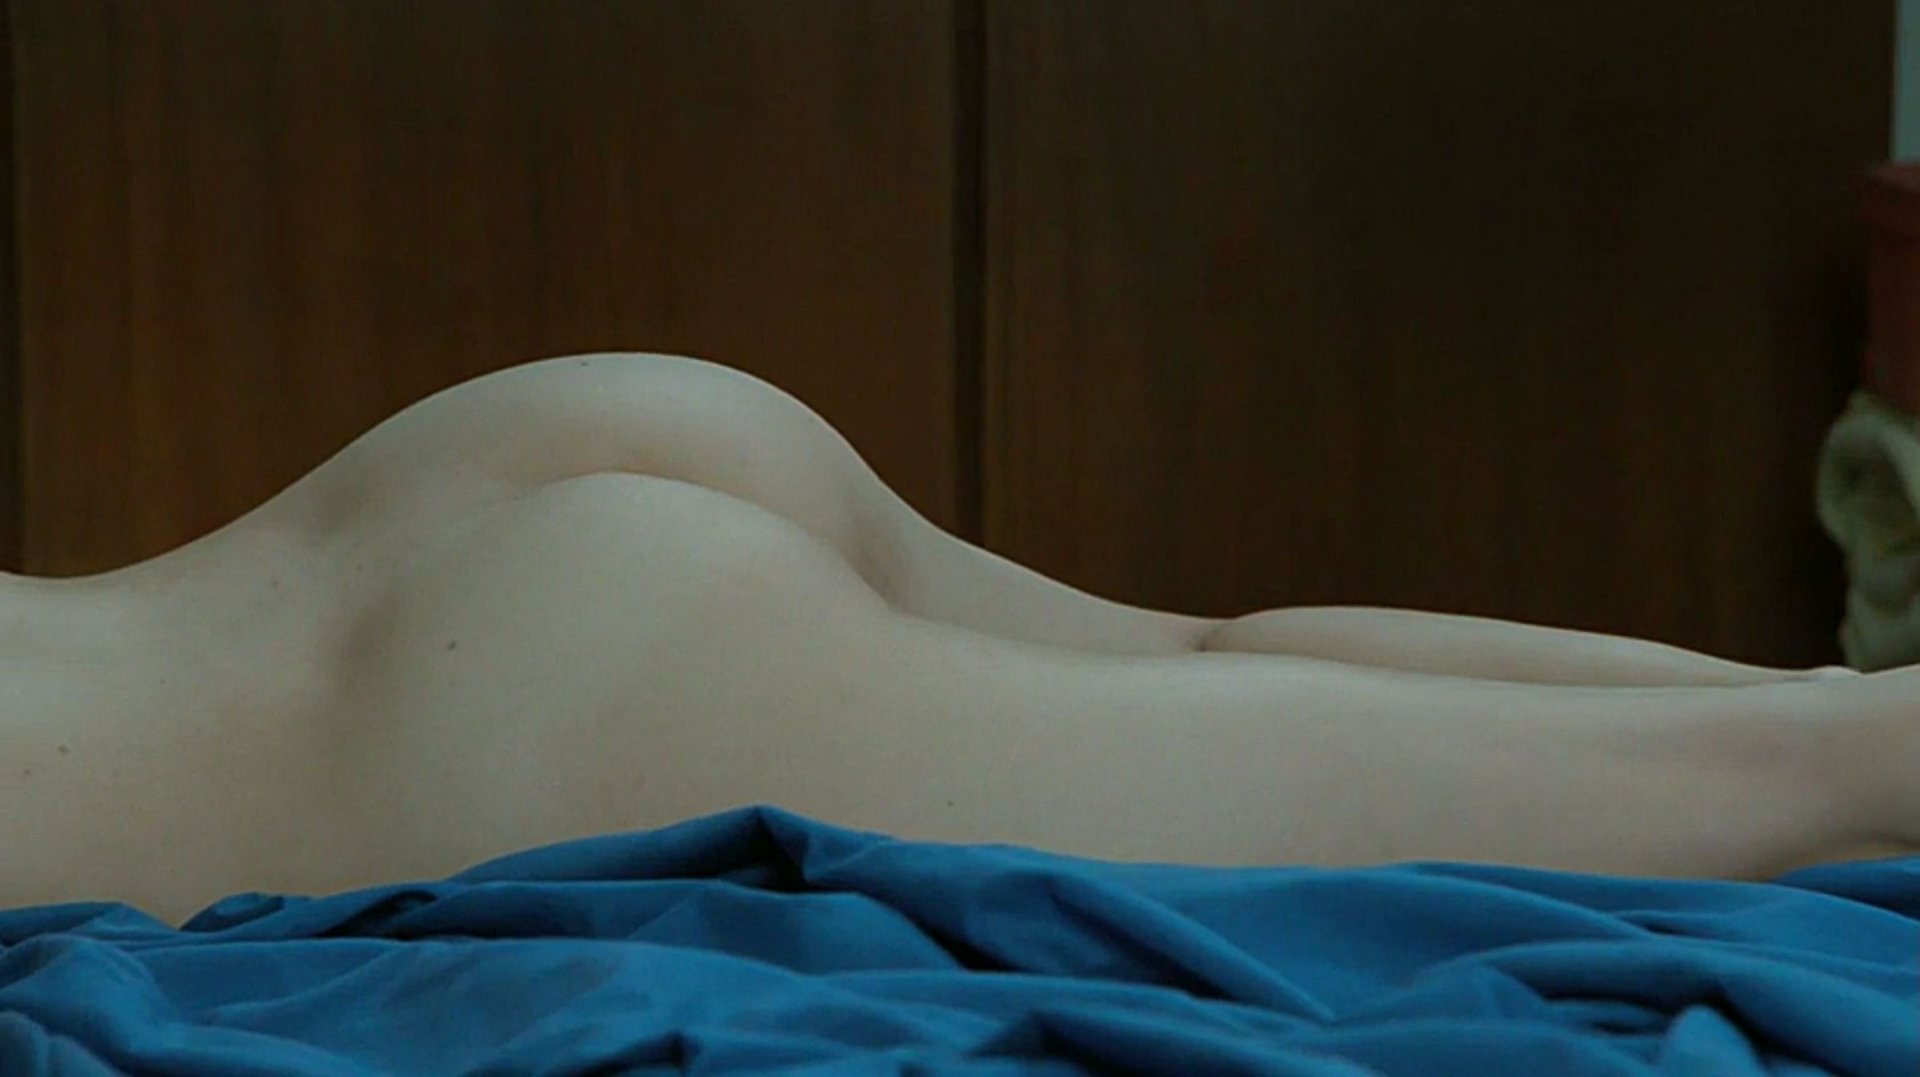 Check out some HQ screencaps and video of naked Stacy Martin from Le Redout...